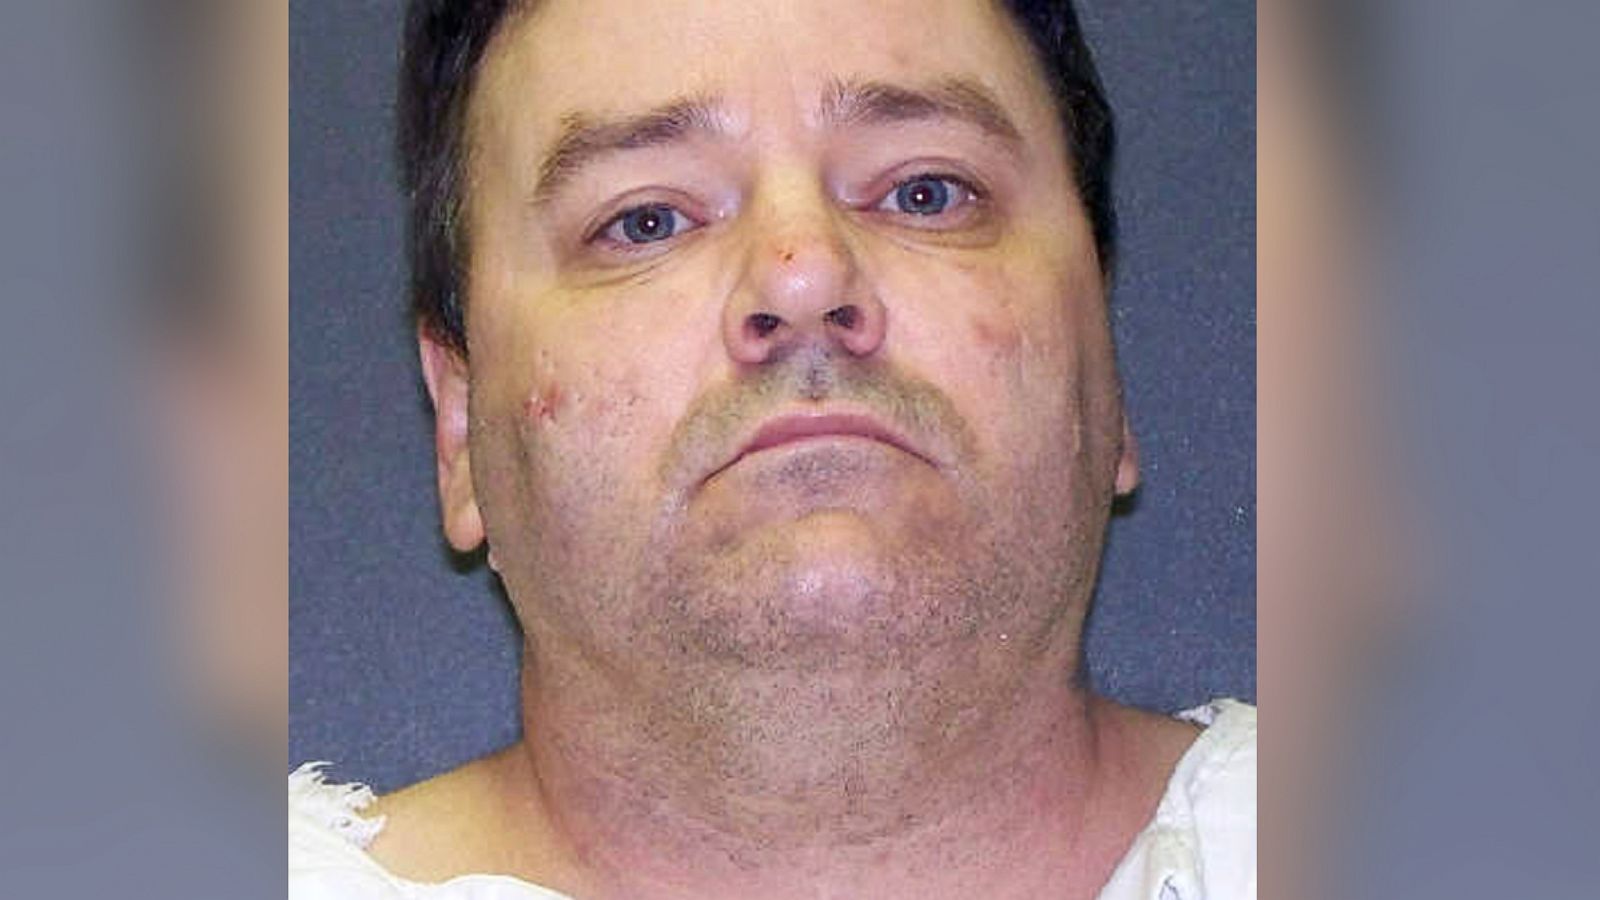 Convicted Serial Killer Tommy Lynn Sells Executed in Texas - ABC News